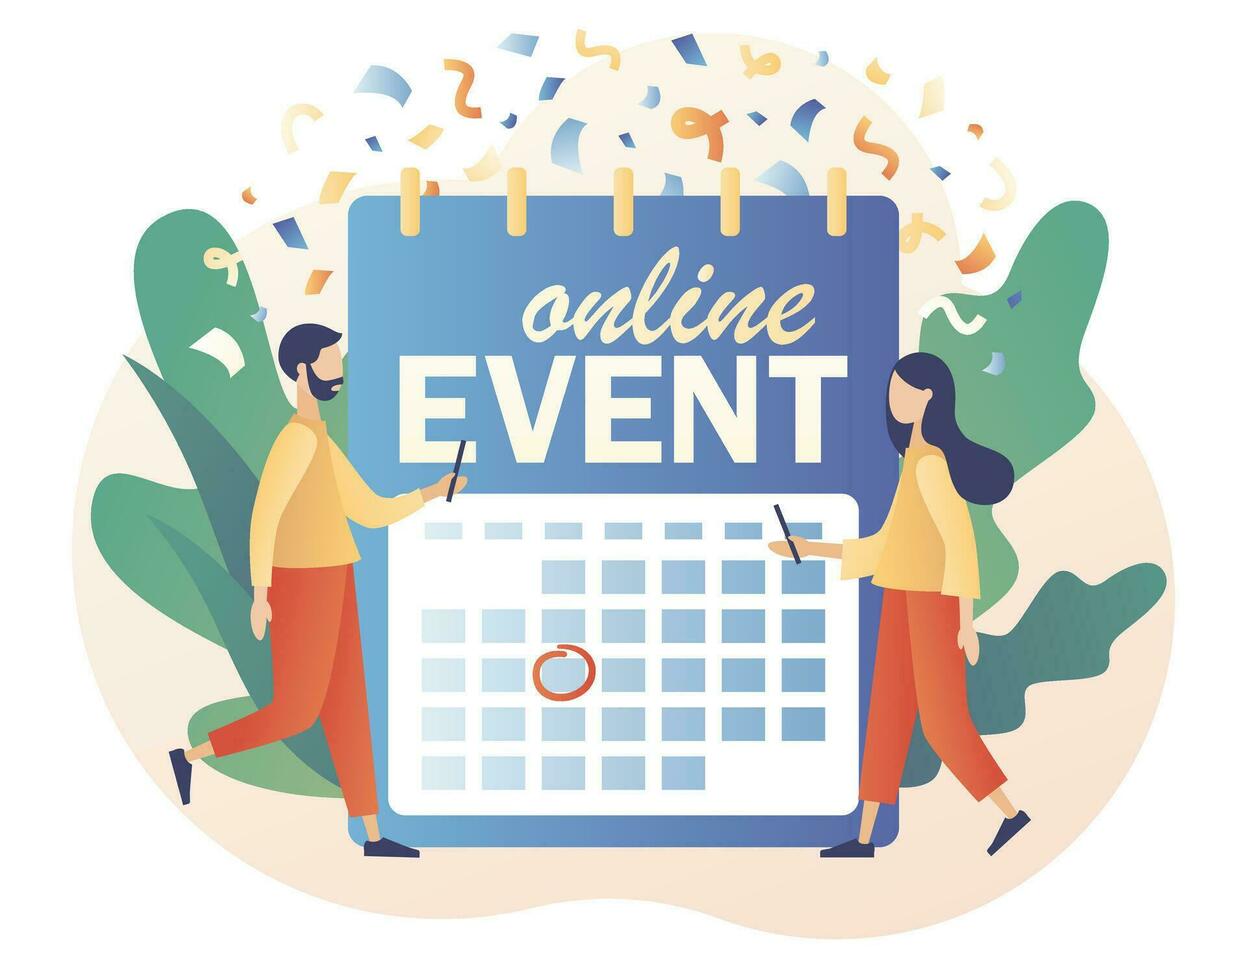 Online events scheduled on the calendar. Tiny people celebration. Corporate party, meeting friends and colleagues. Video conference. Modern flat cartoon style. Vector illustration on white background